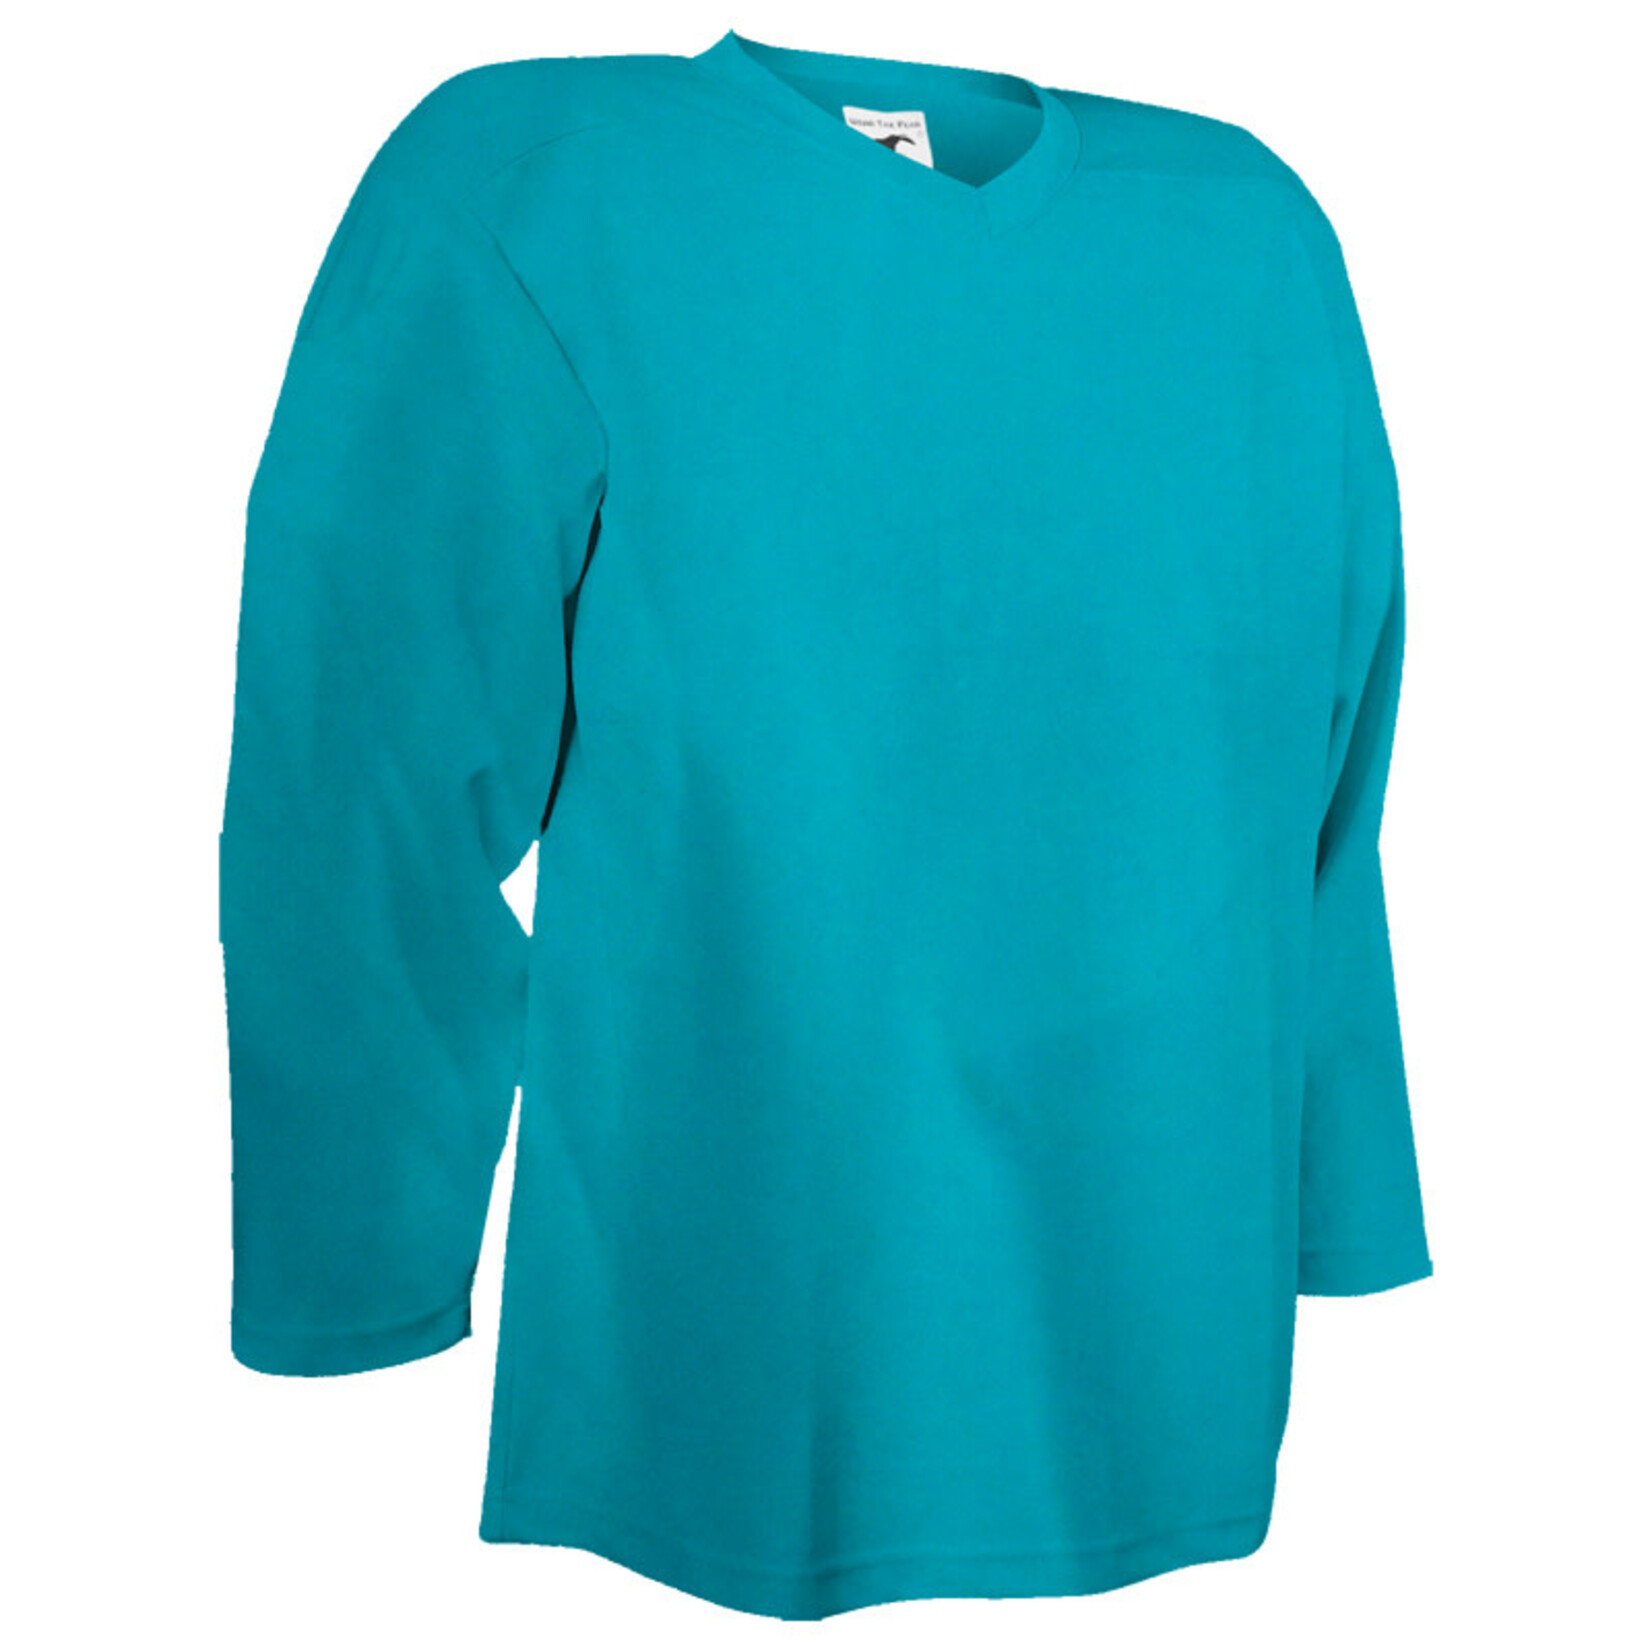 Pear Sox Pear Sox Air Mesh Practice Jersey (ADULT TEAL)